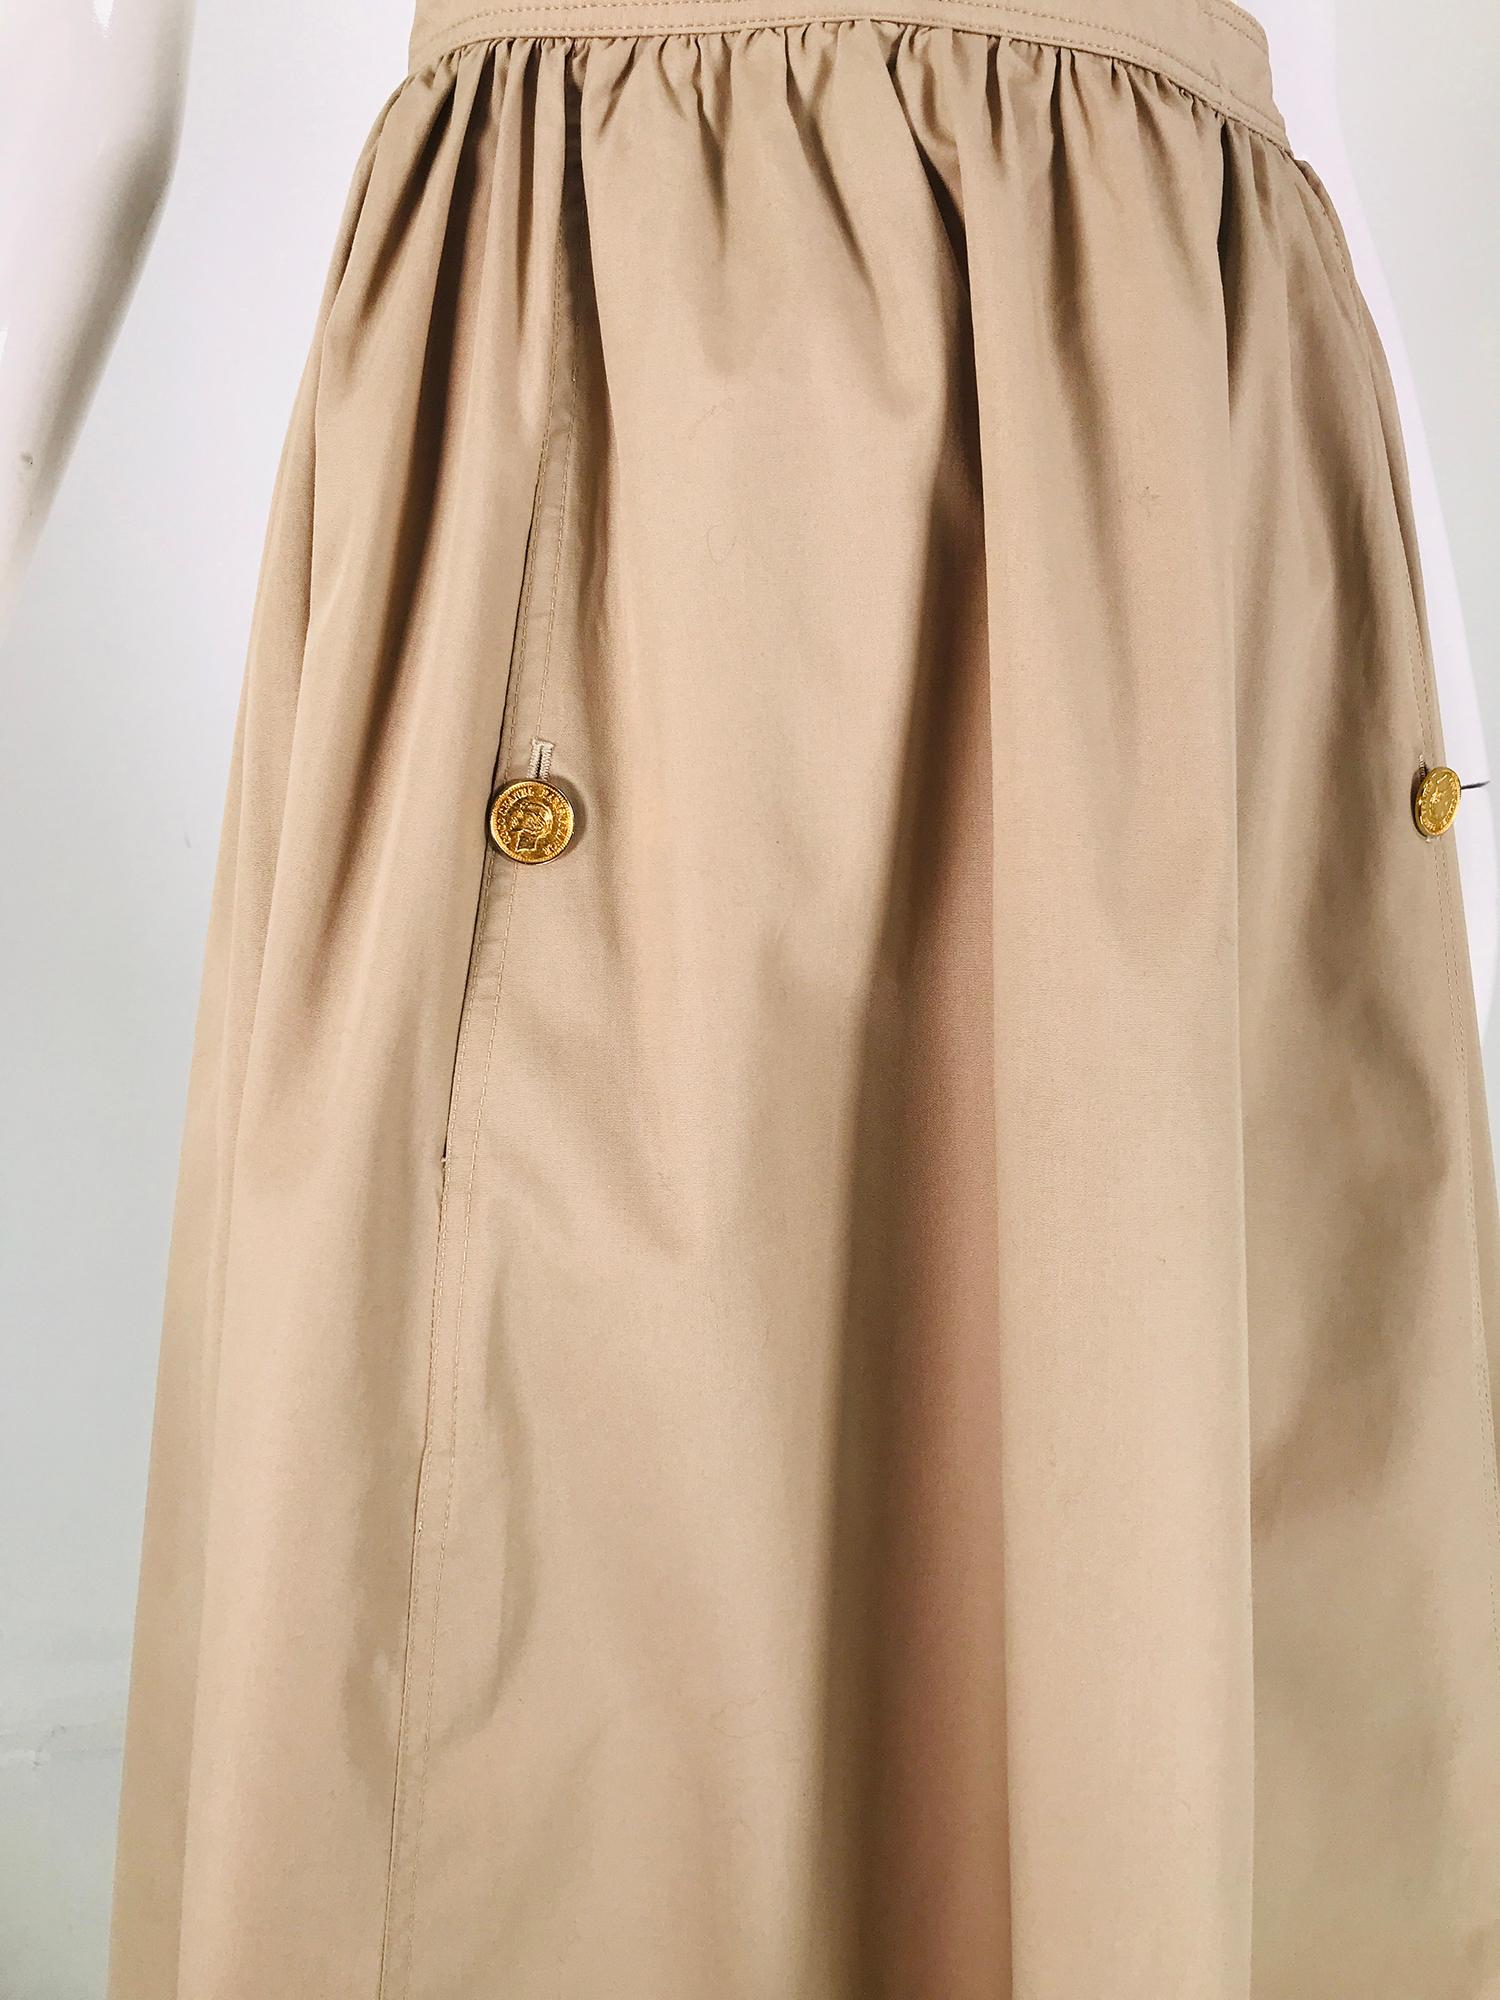 Vintage Chanel tan poplin gathered skirt with button front pockets. Band waist is has a horizontally stitched waist band, the skirt is gathered with hip front pockets that close with a gold logo button each. Safari style skirt is perfect for travel.